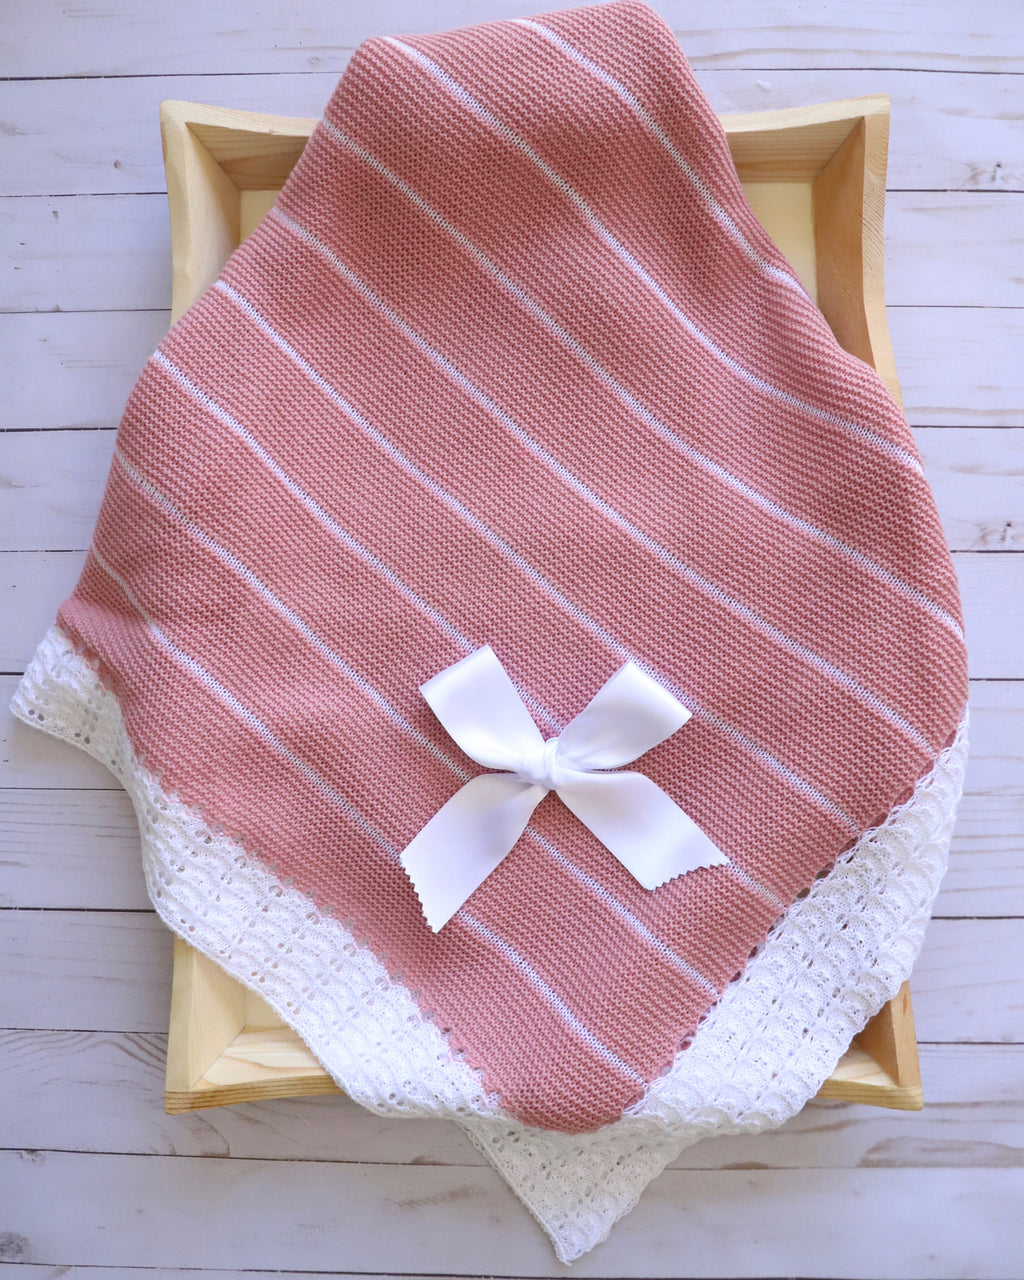 Knitted blanket - Dark pink and white